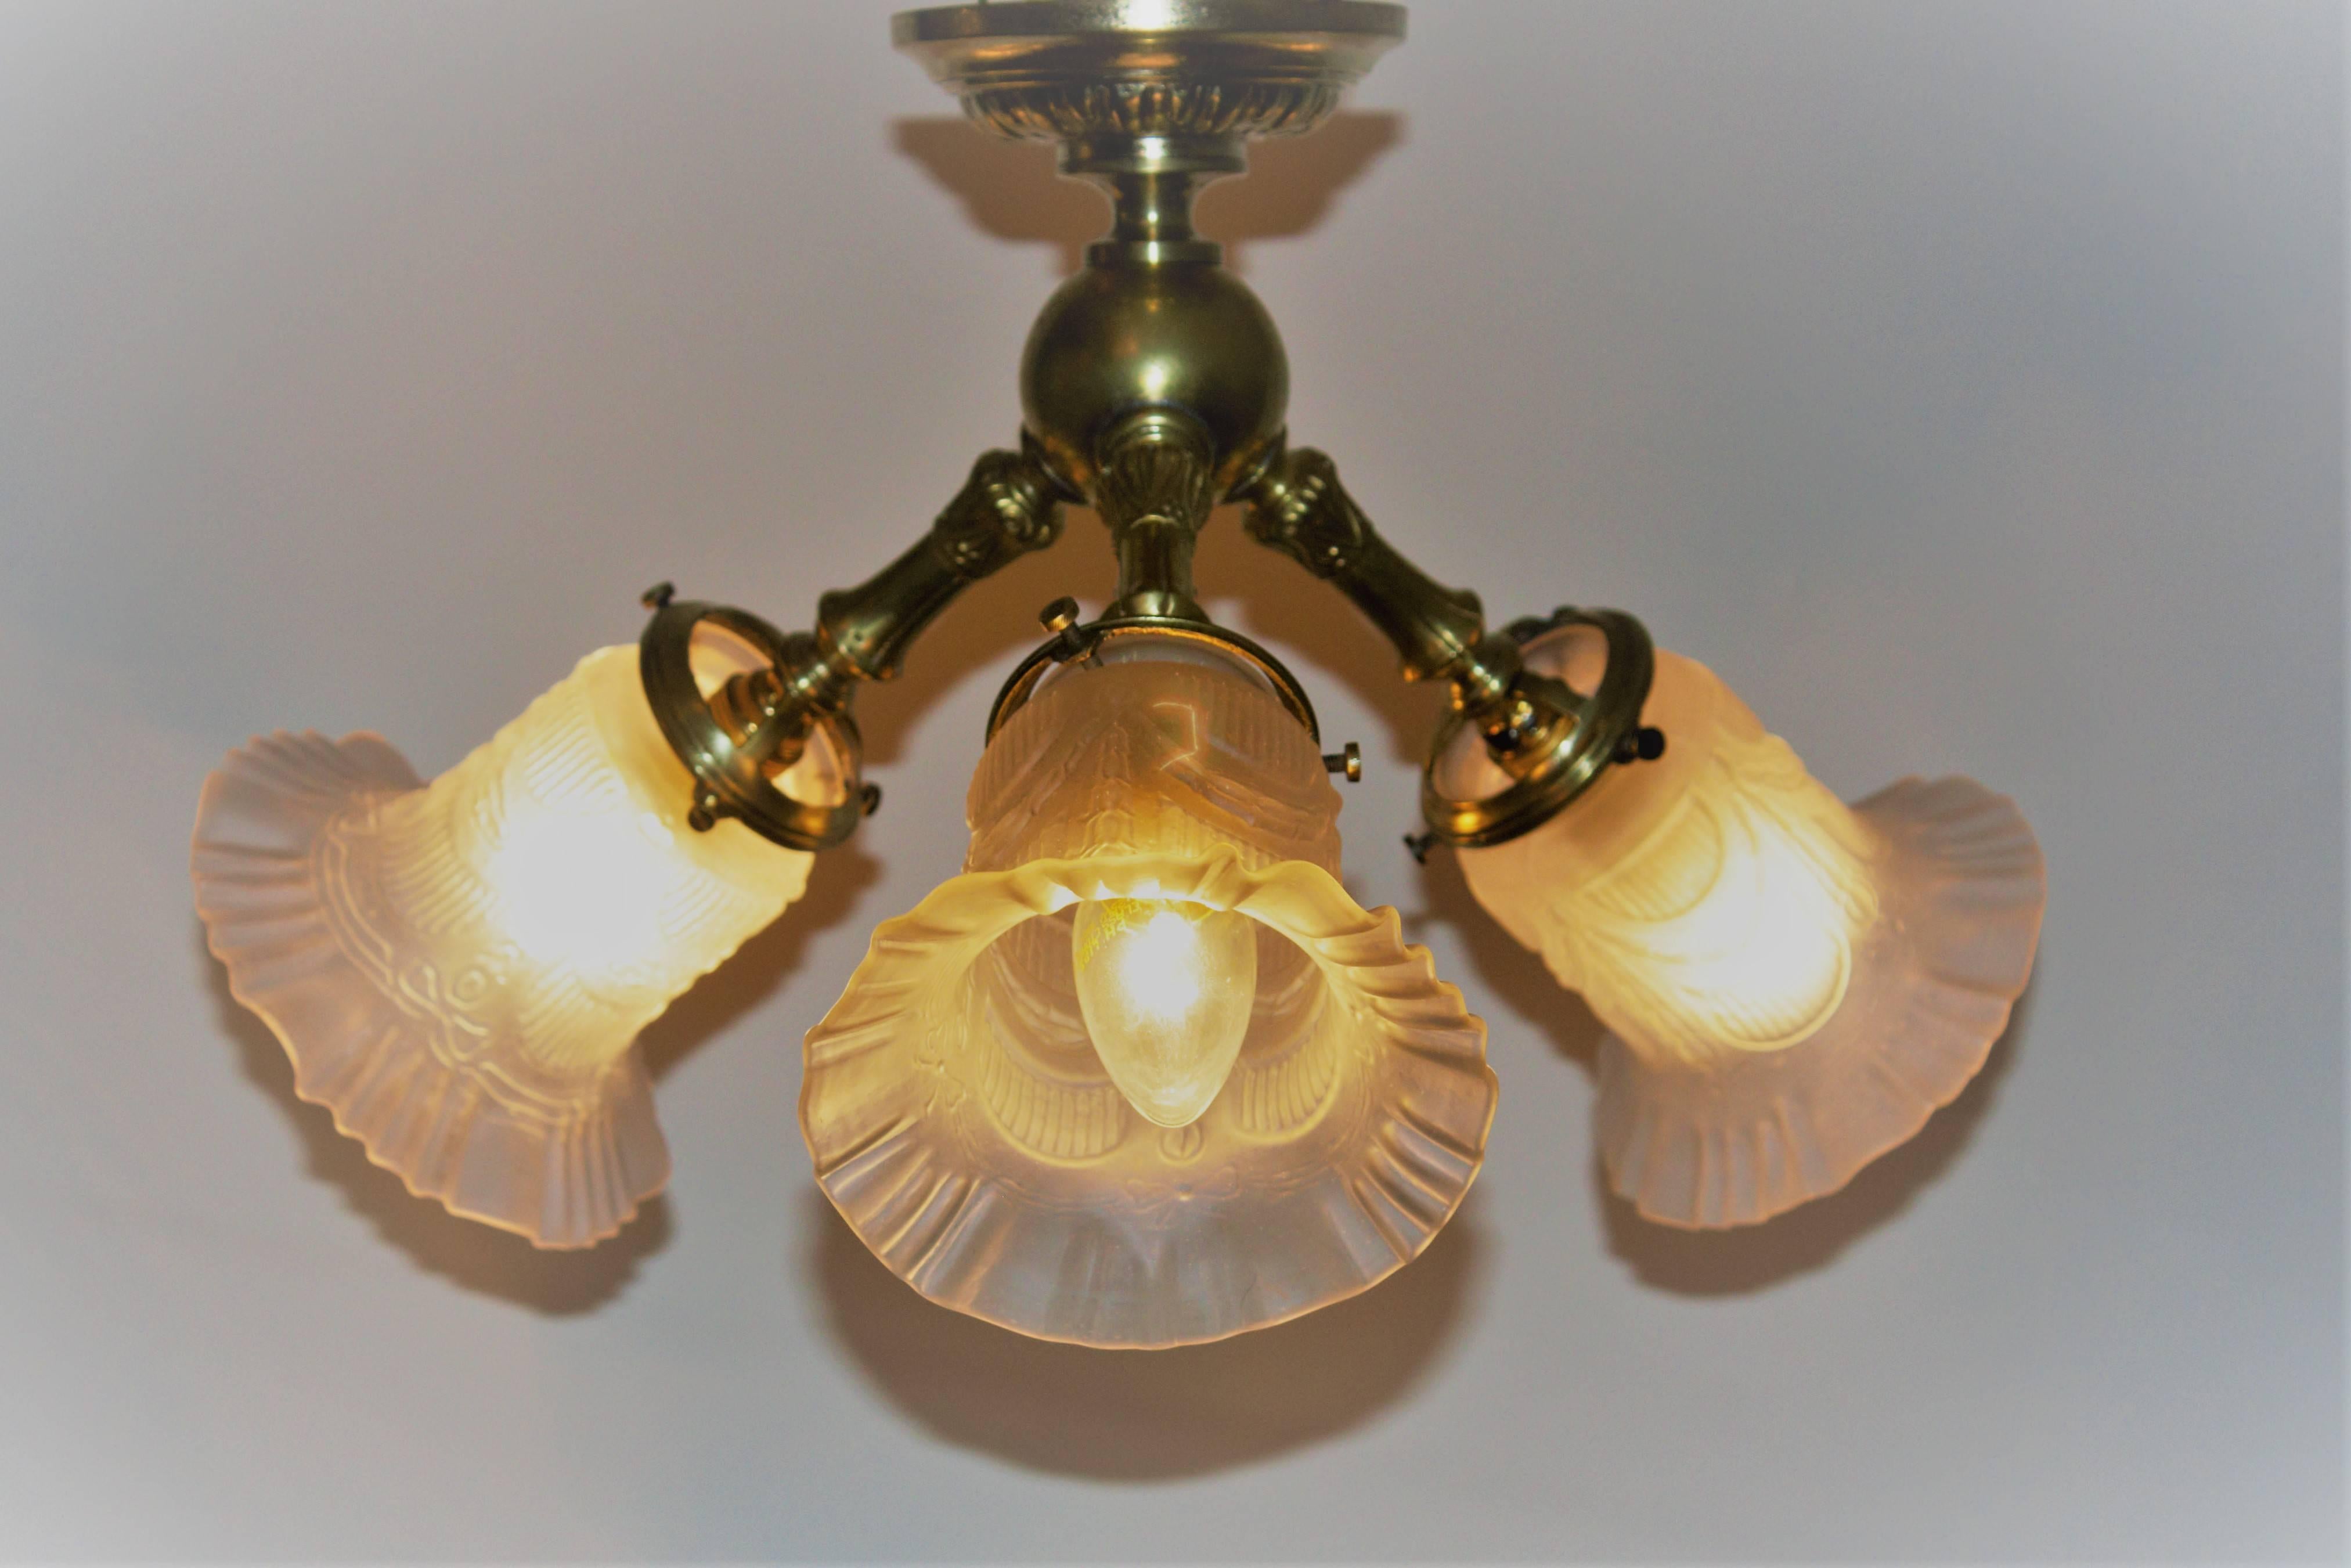 Small and very elegant Art Nouveau three-light brass chandelier, circa 1900s.
Socket: 3 x e14 (edison) for standard screw bulbs.
Excellent condition.
New rewired for US.
   